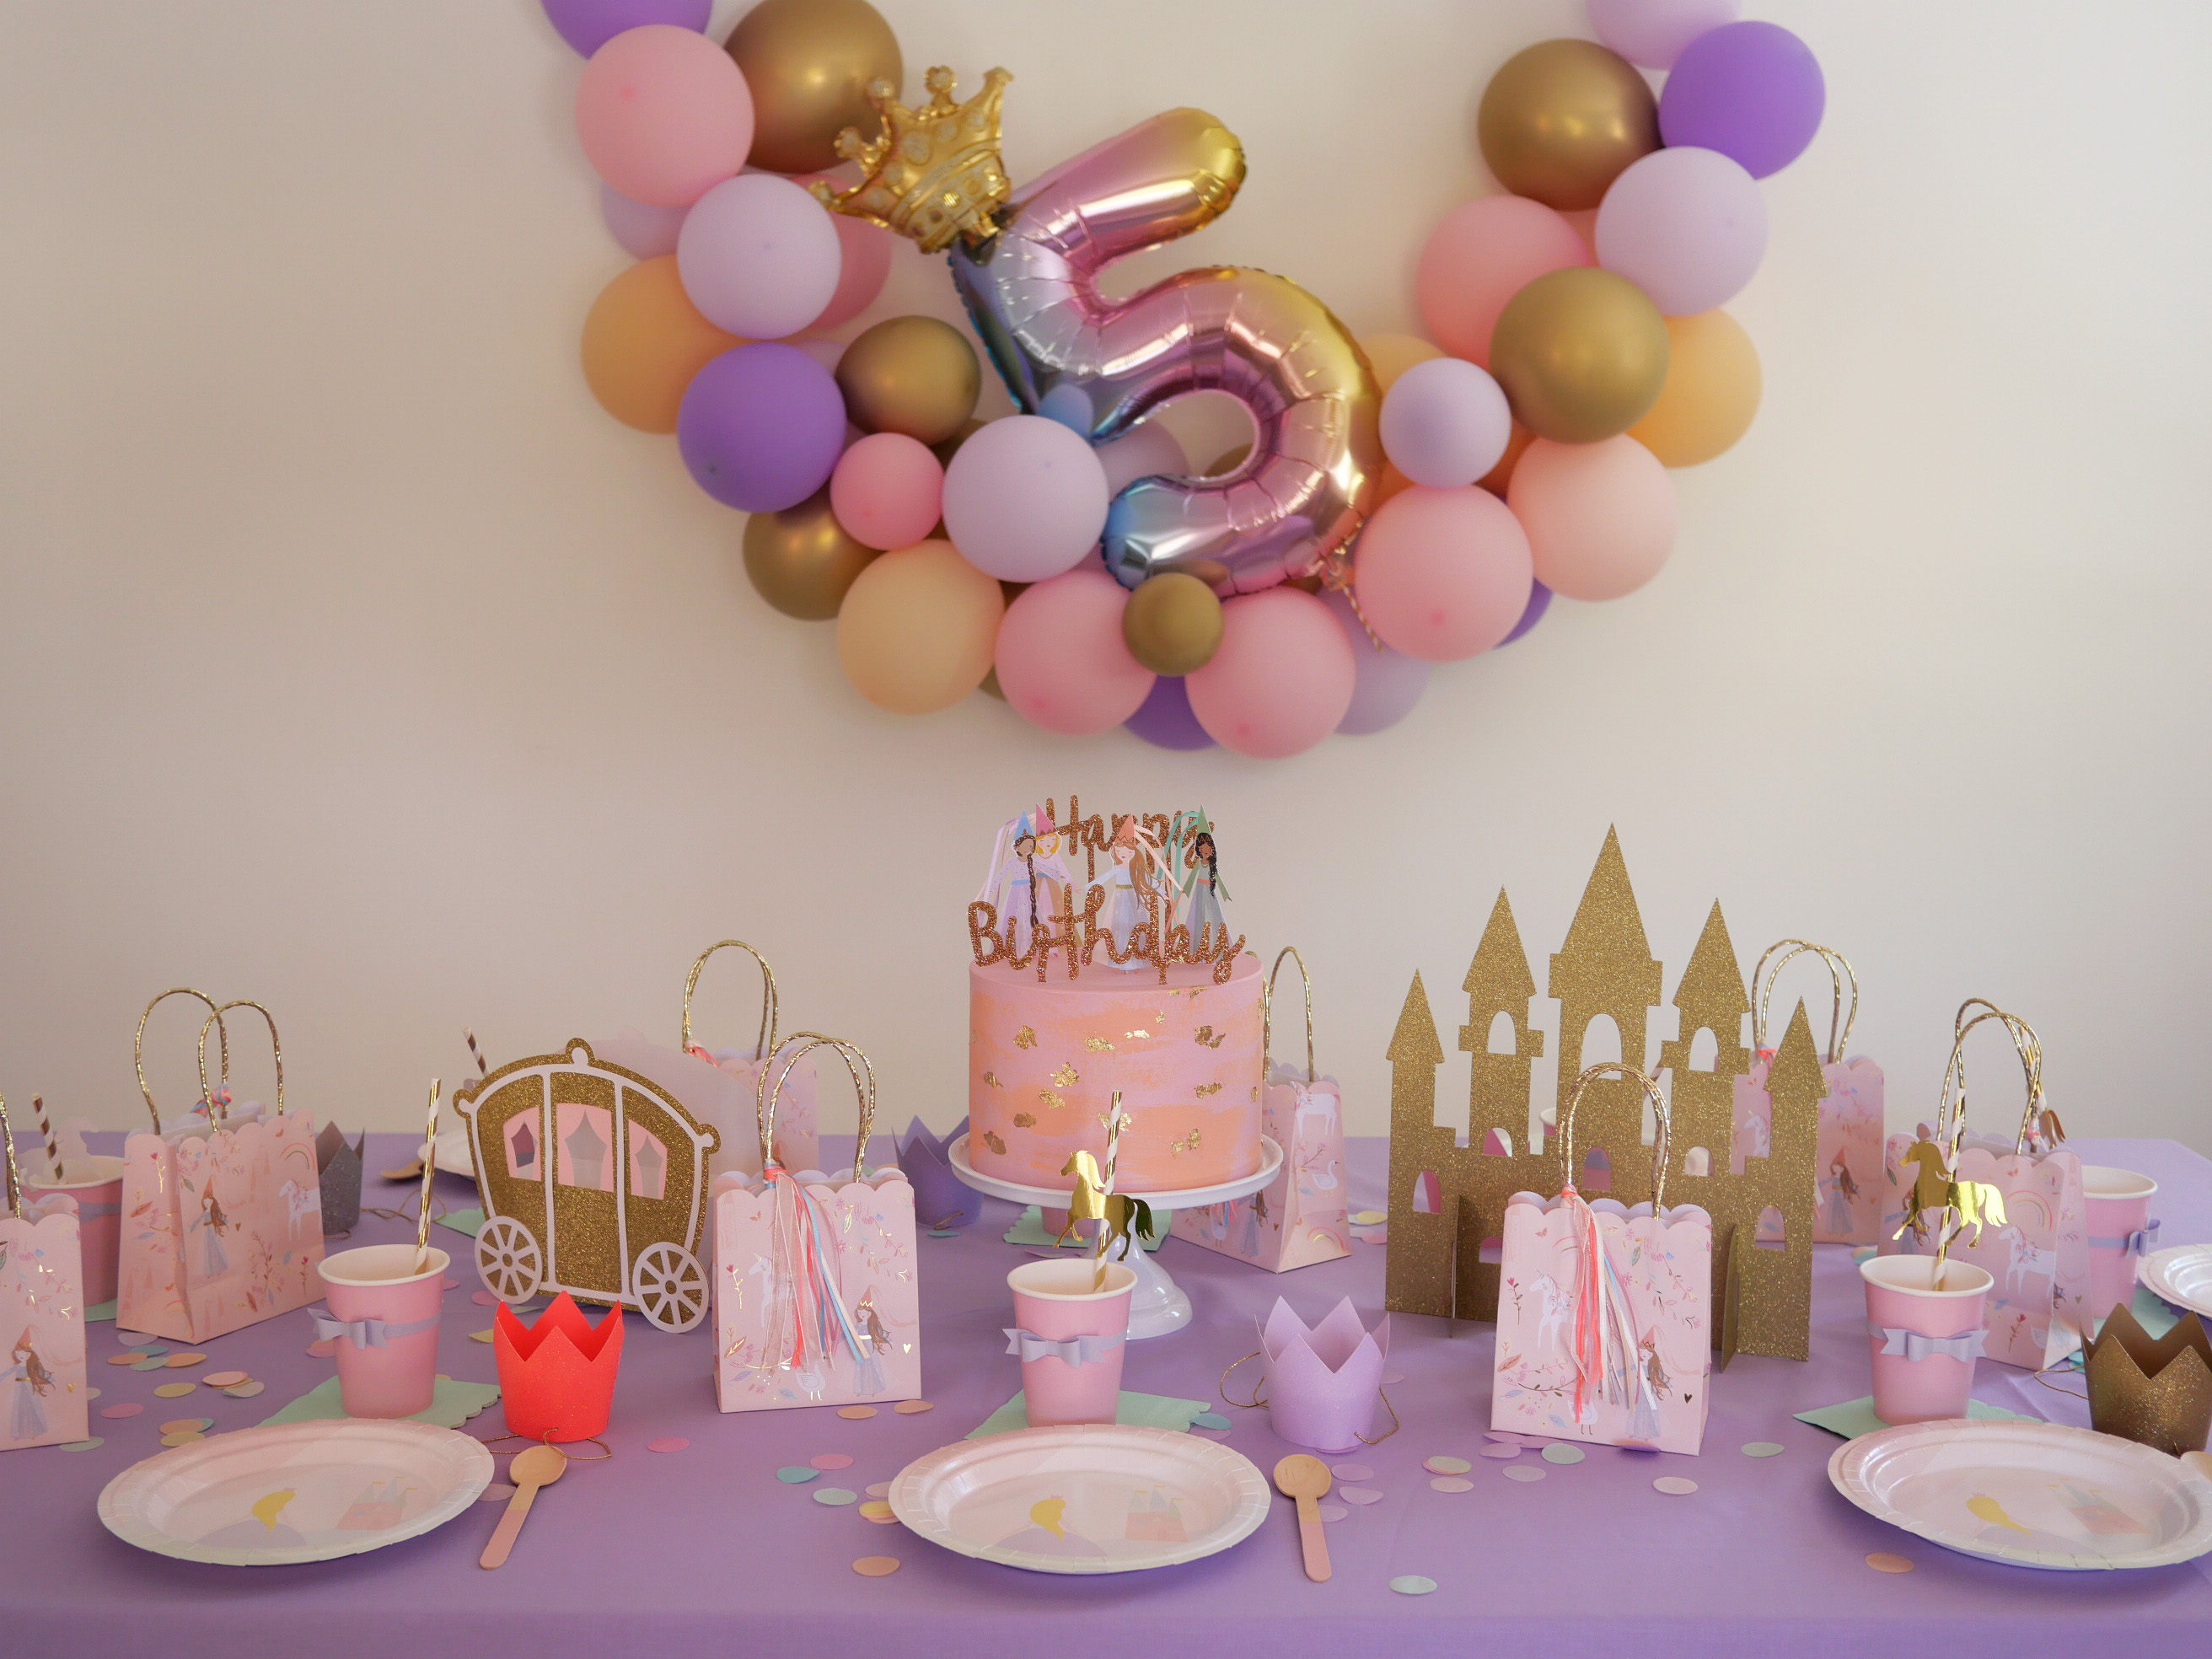 Bougie chiffre rose - Bougie anniversaire fille My Little Day